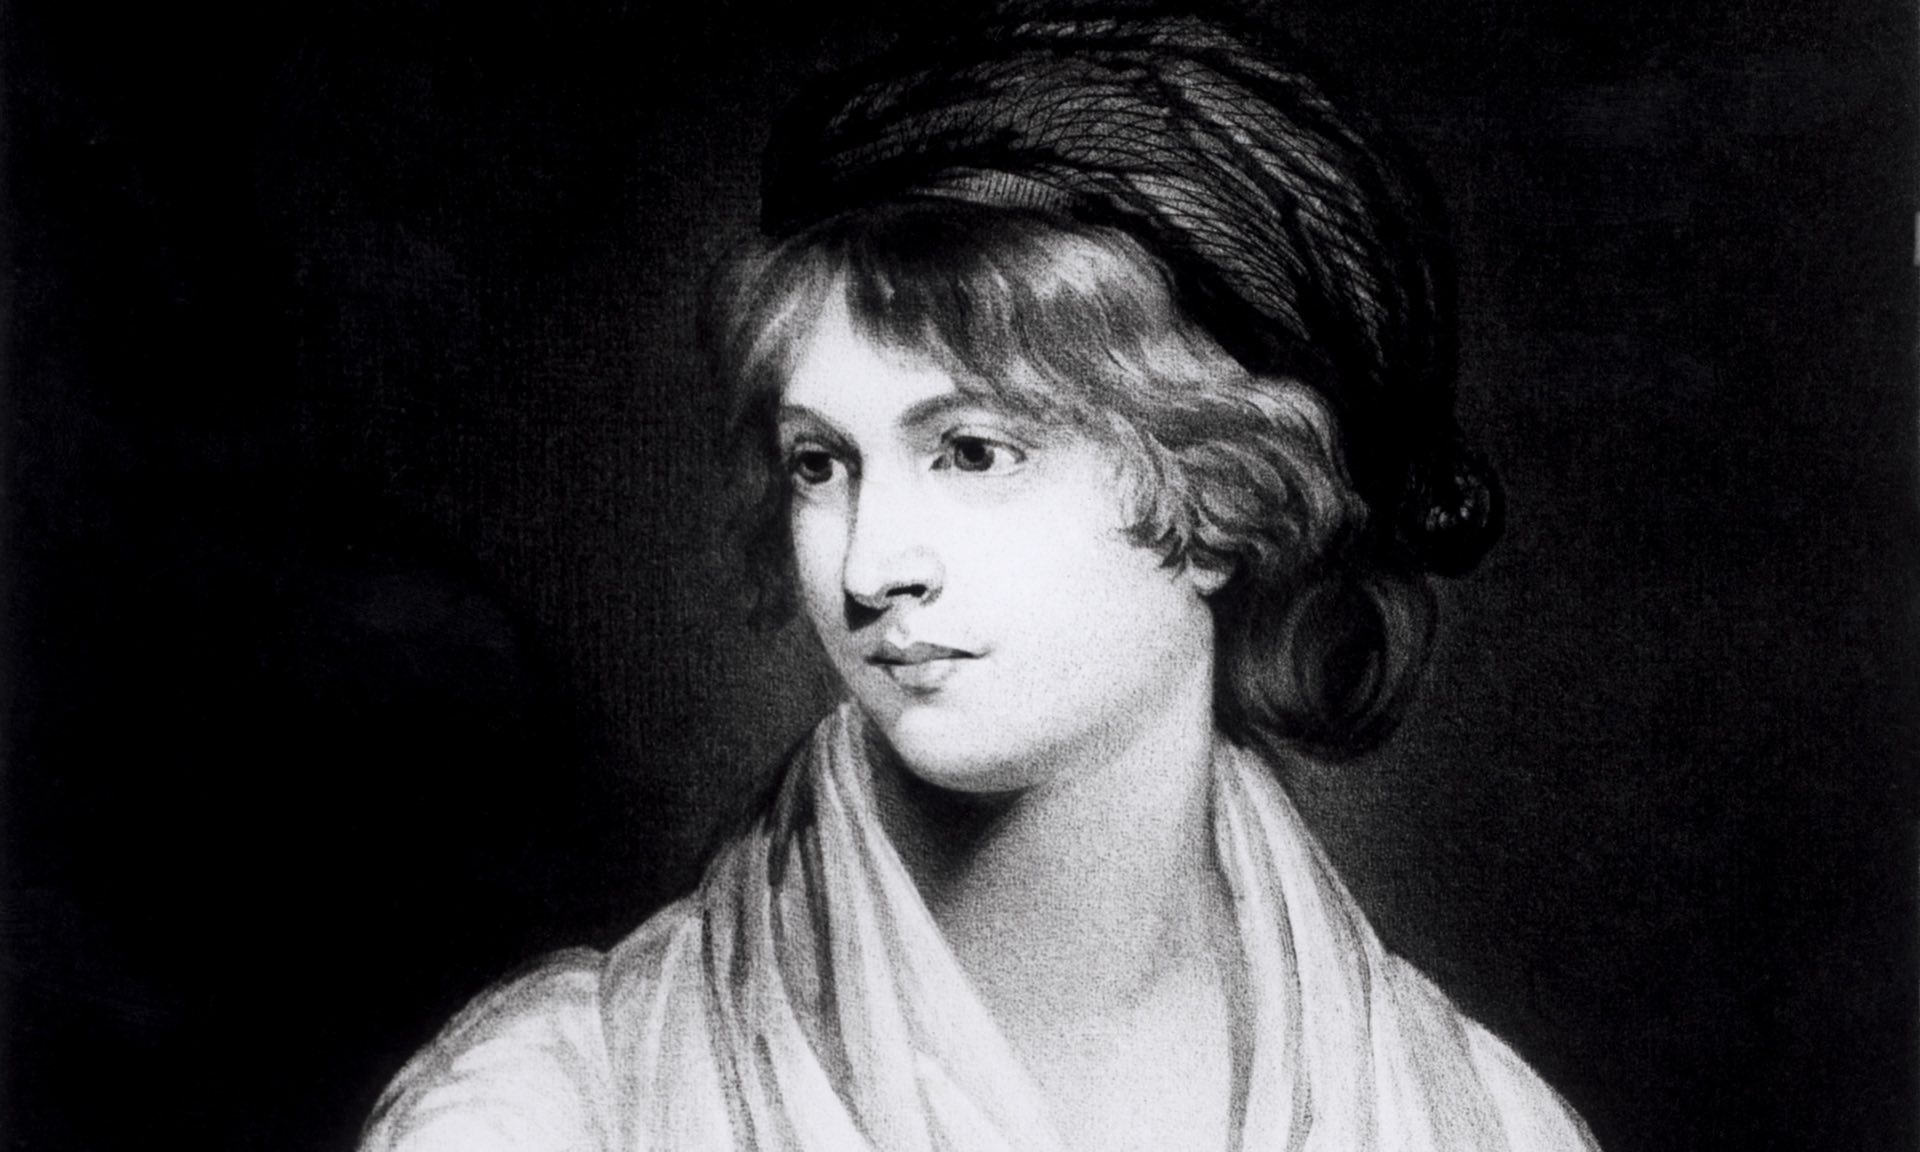 #anonymouswasawoman: #HERstory: The original suffragette: the extraordinary Mary Wollstonecraft